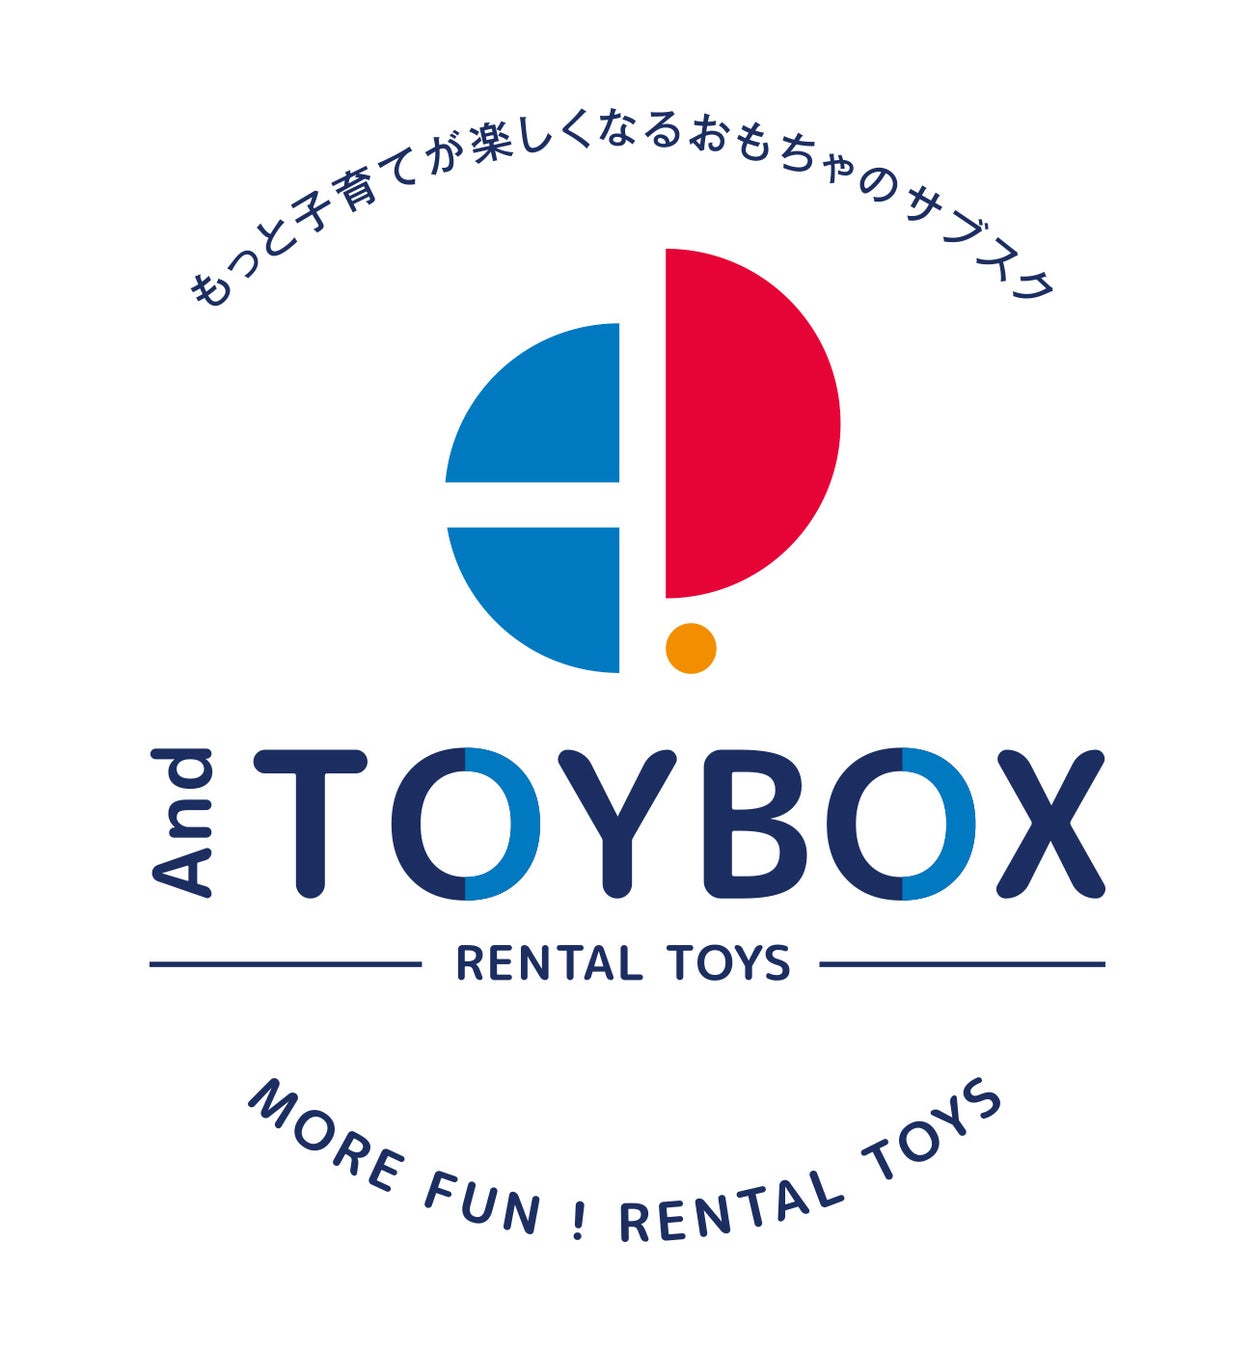 And TOYBOXが新機能リリース！累計登録4000世帯超え！